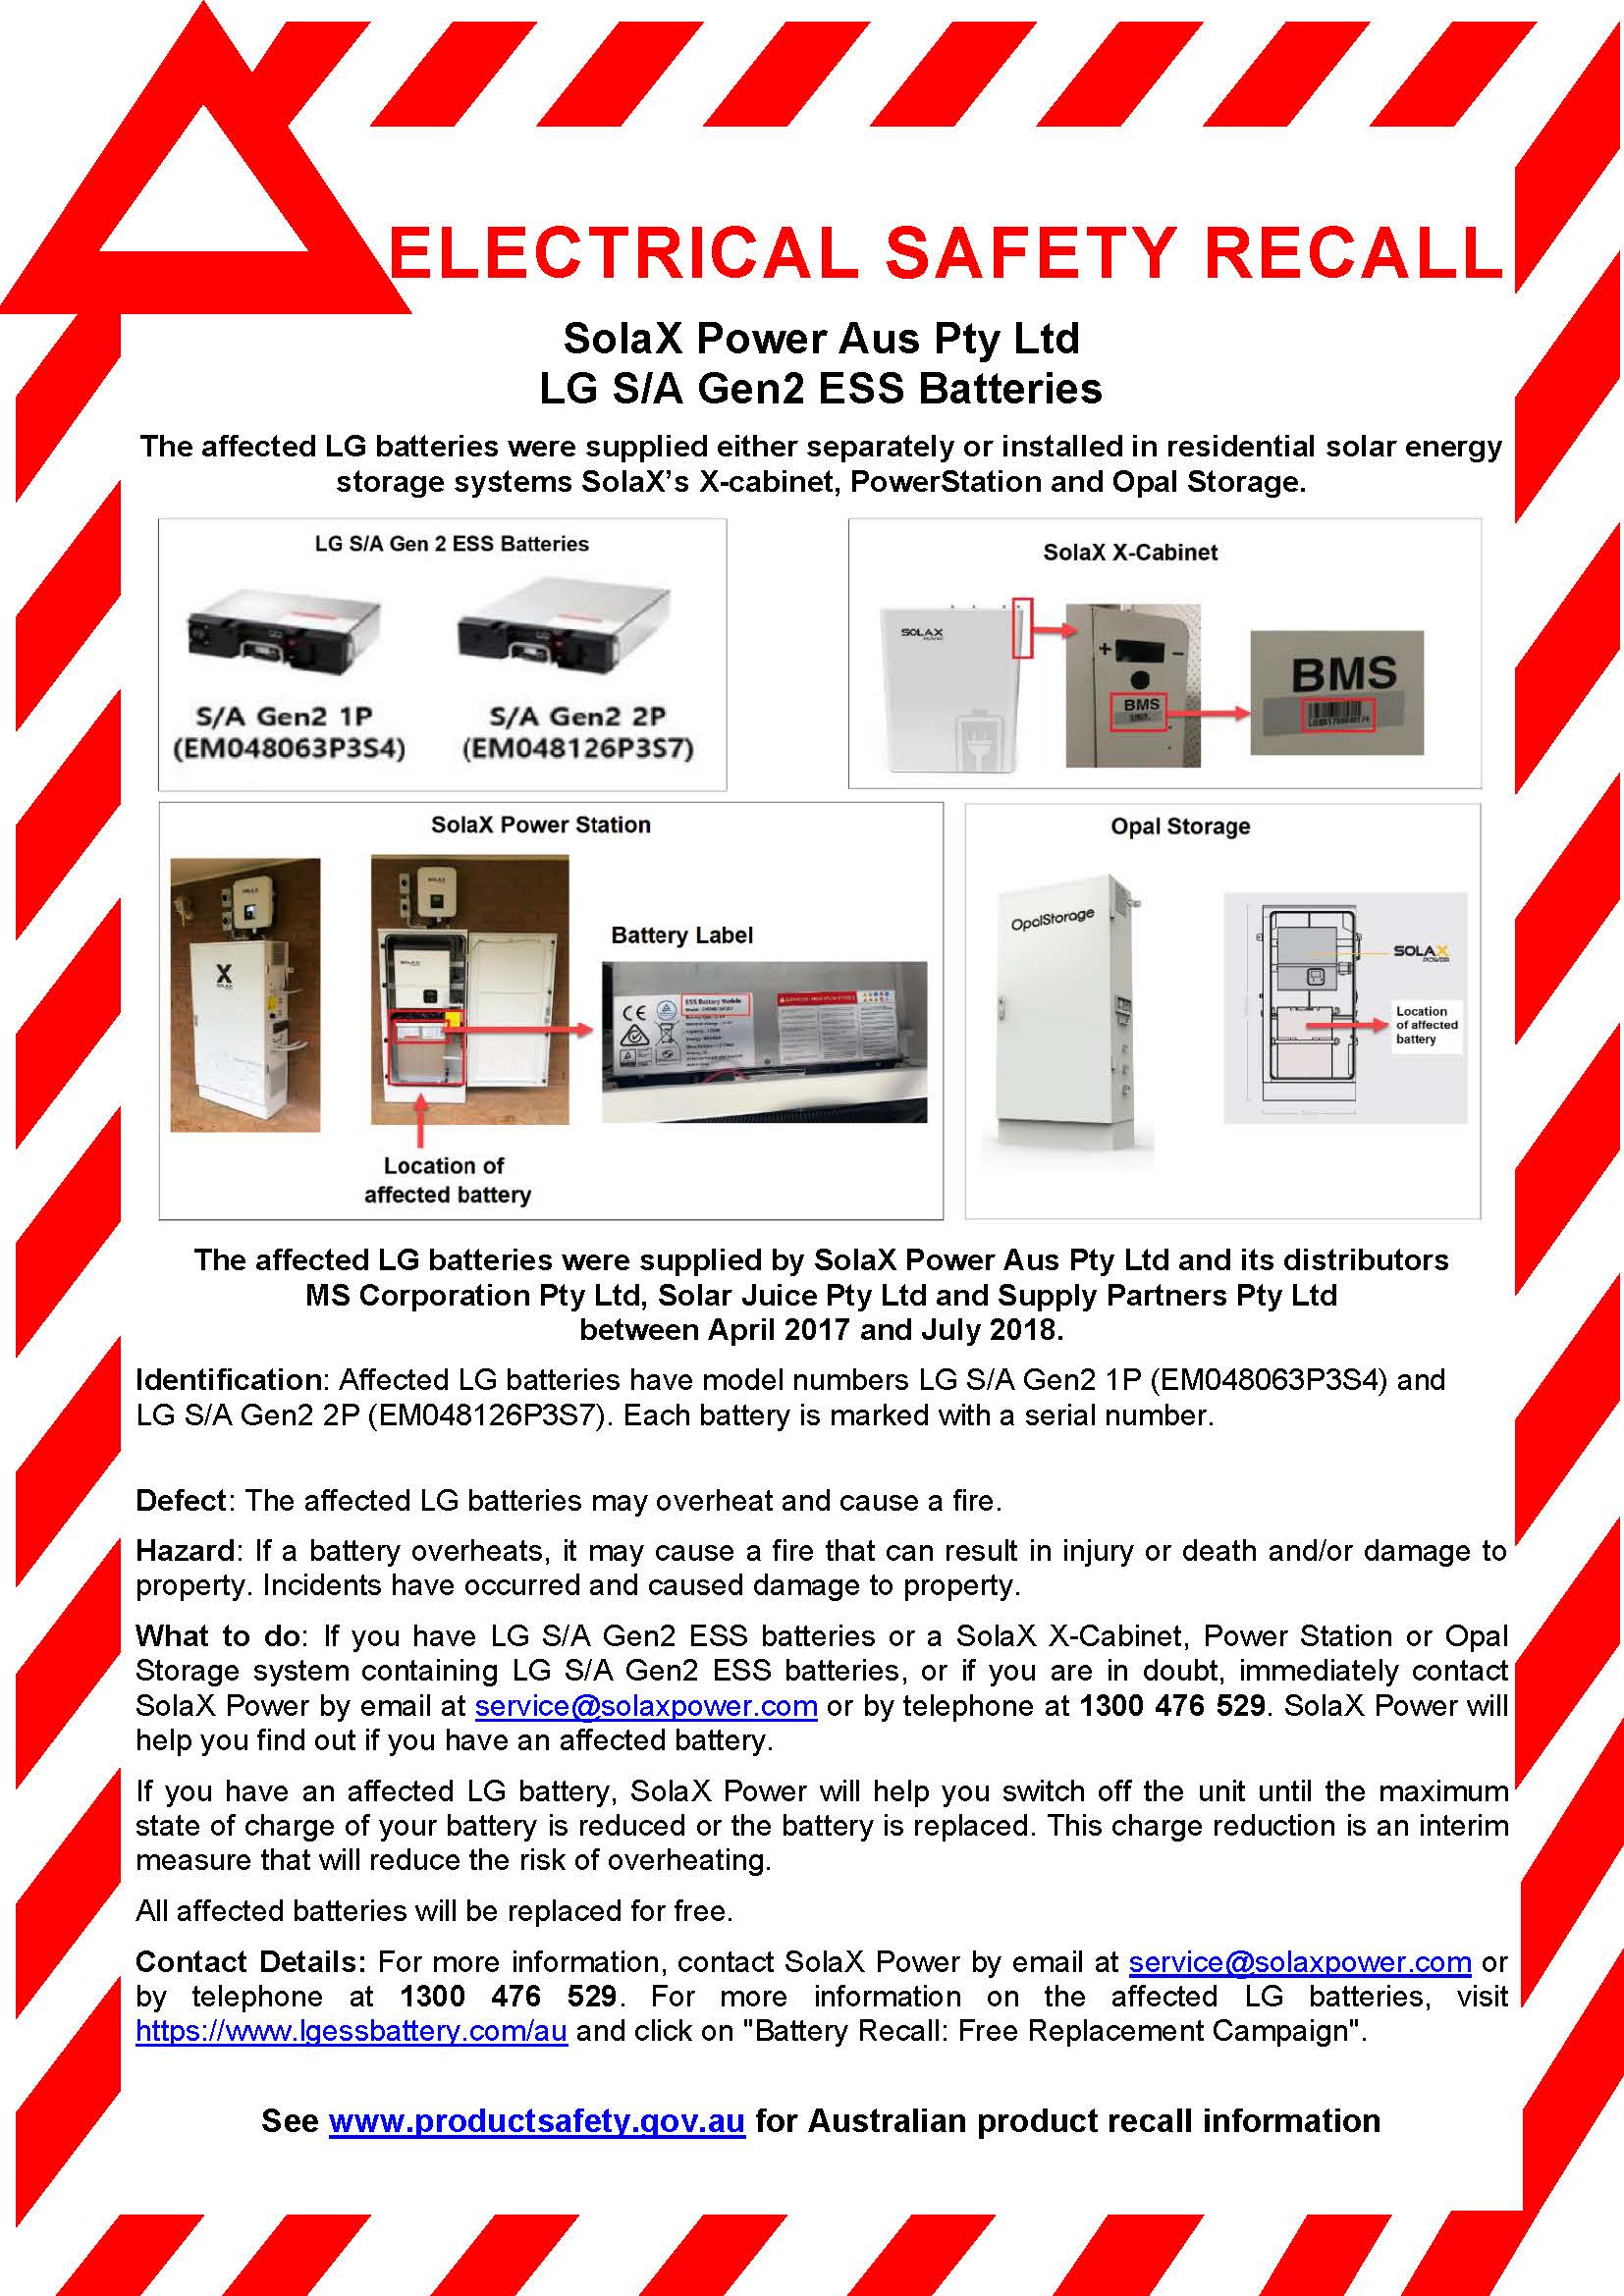 Electrical safety recall poster